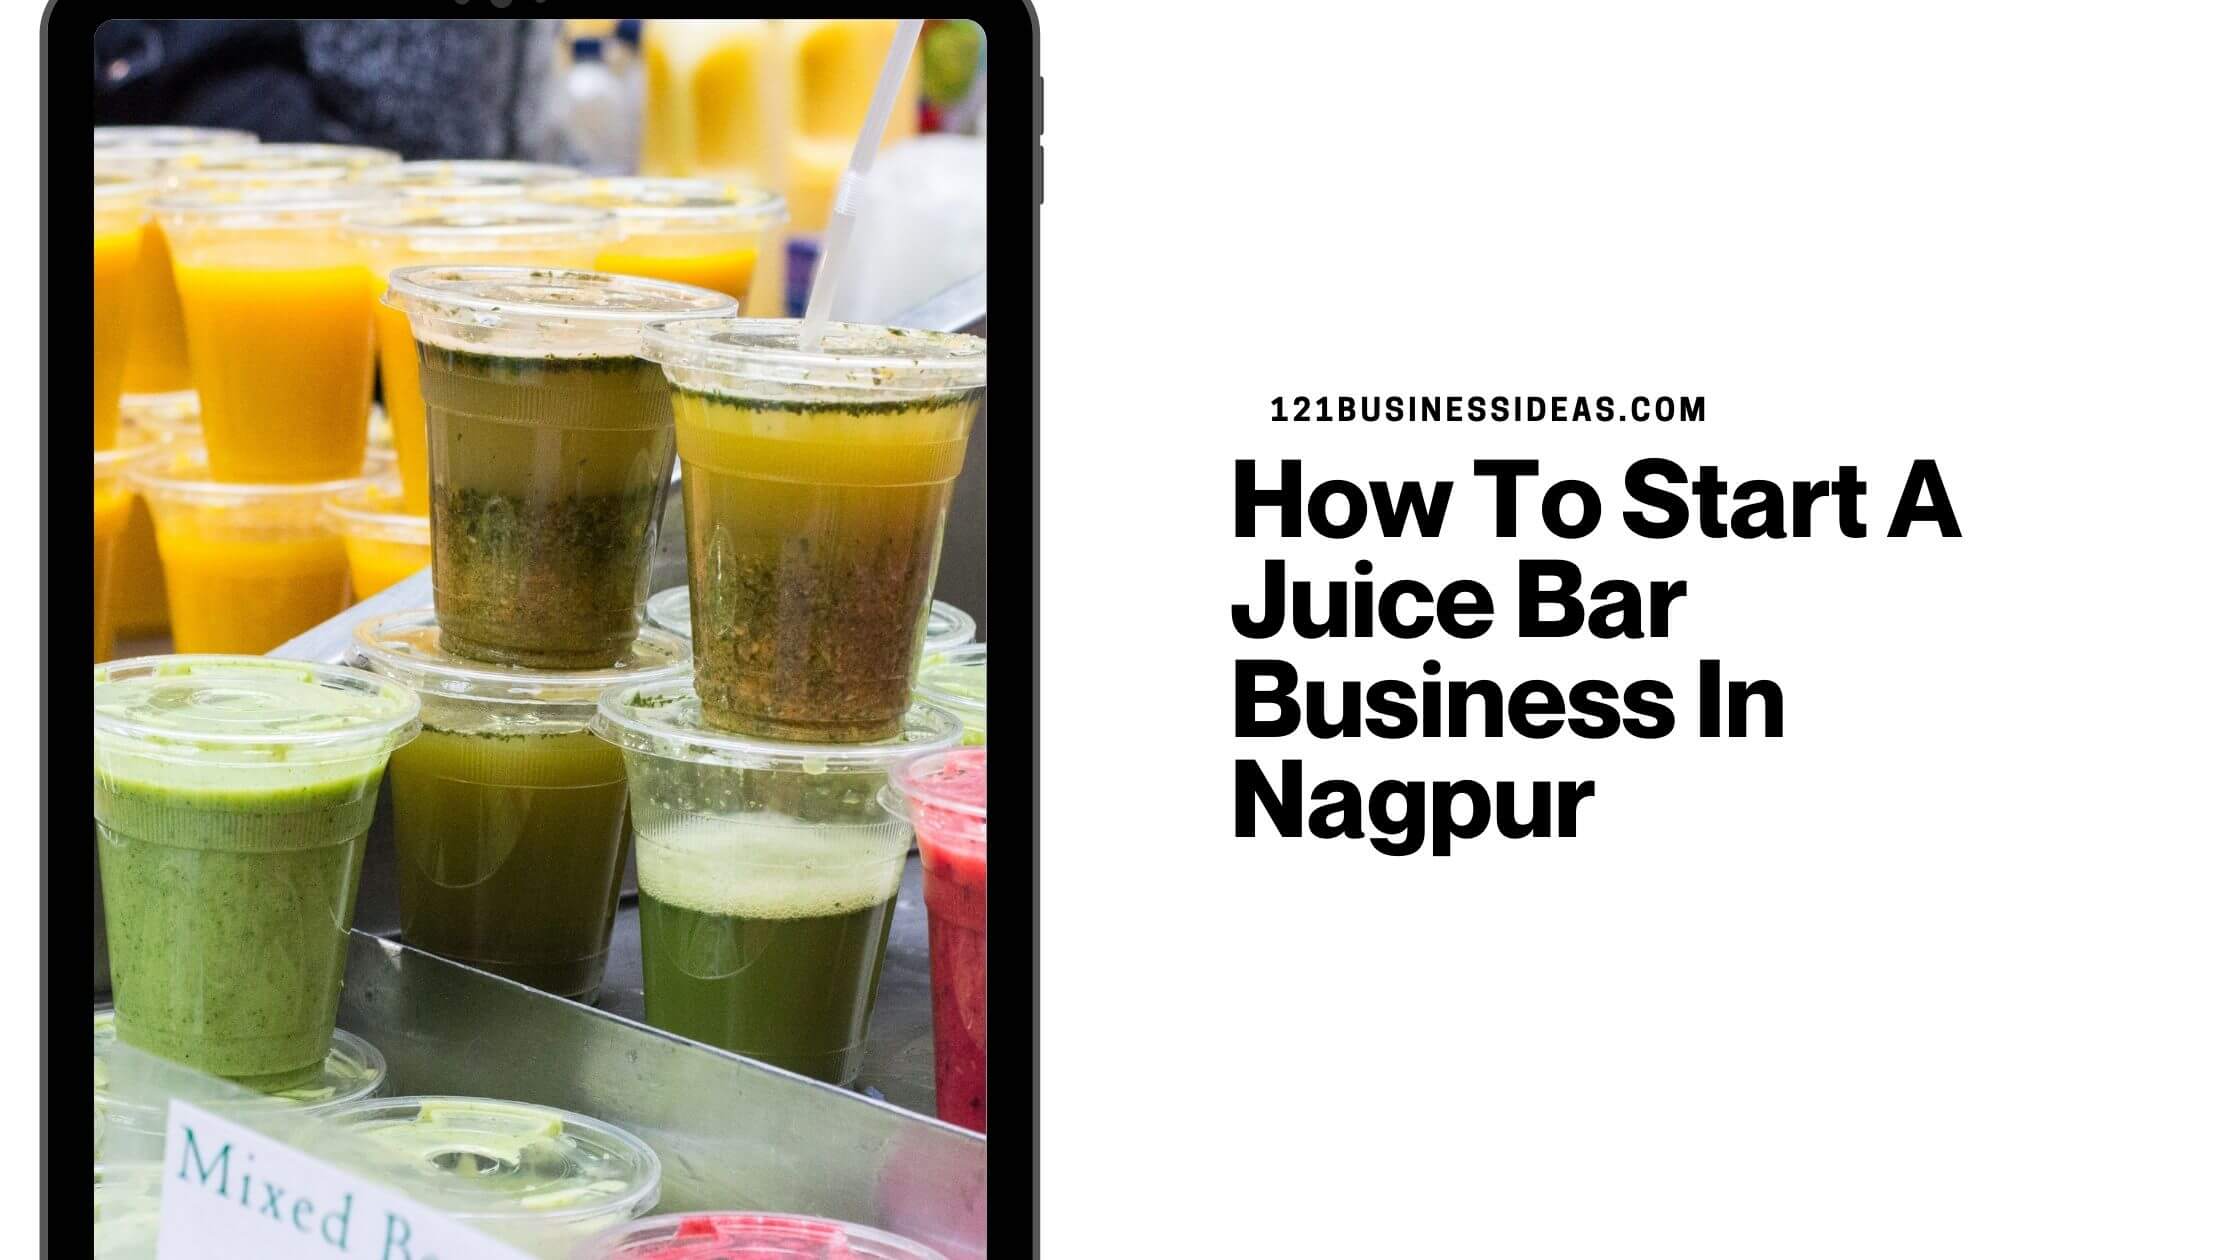 How To Start A Juice Bar Business In Nagpur (1)